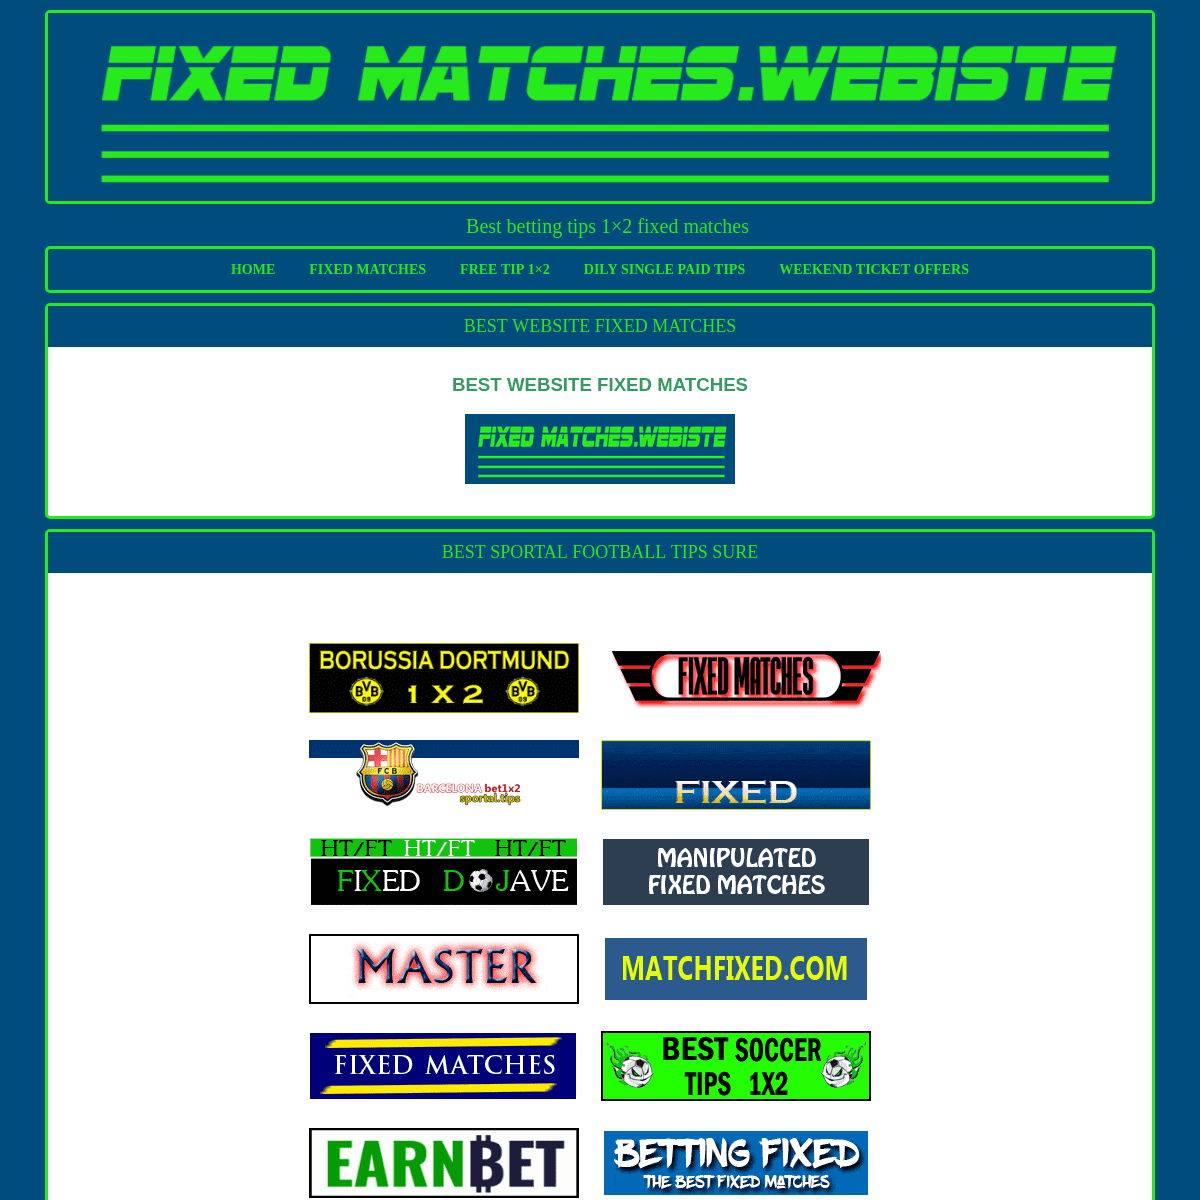 A complete backup of fixedmatches.website